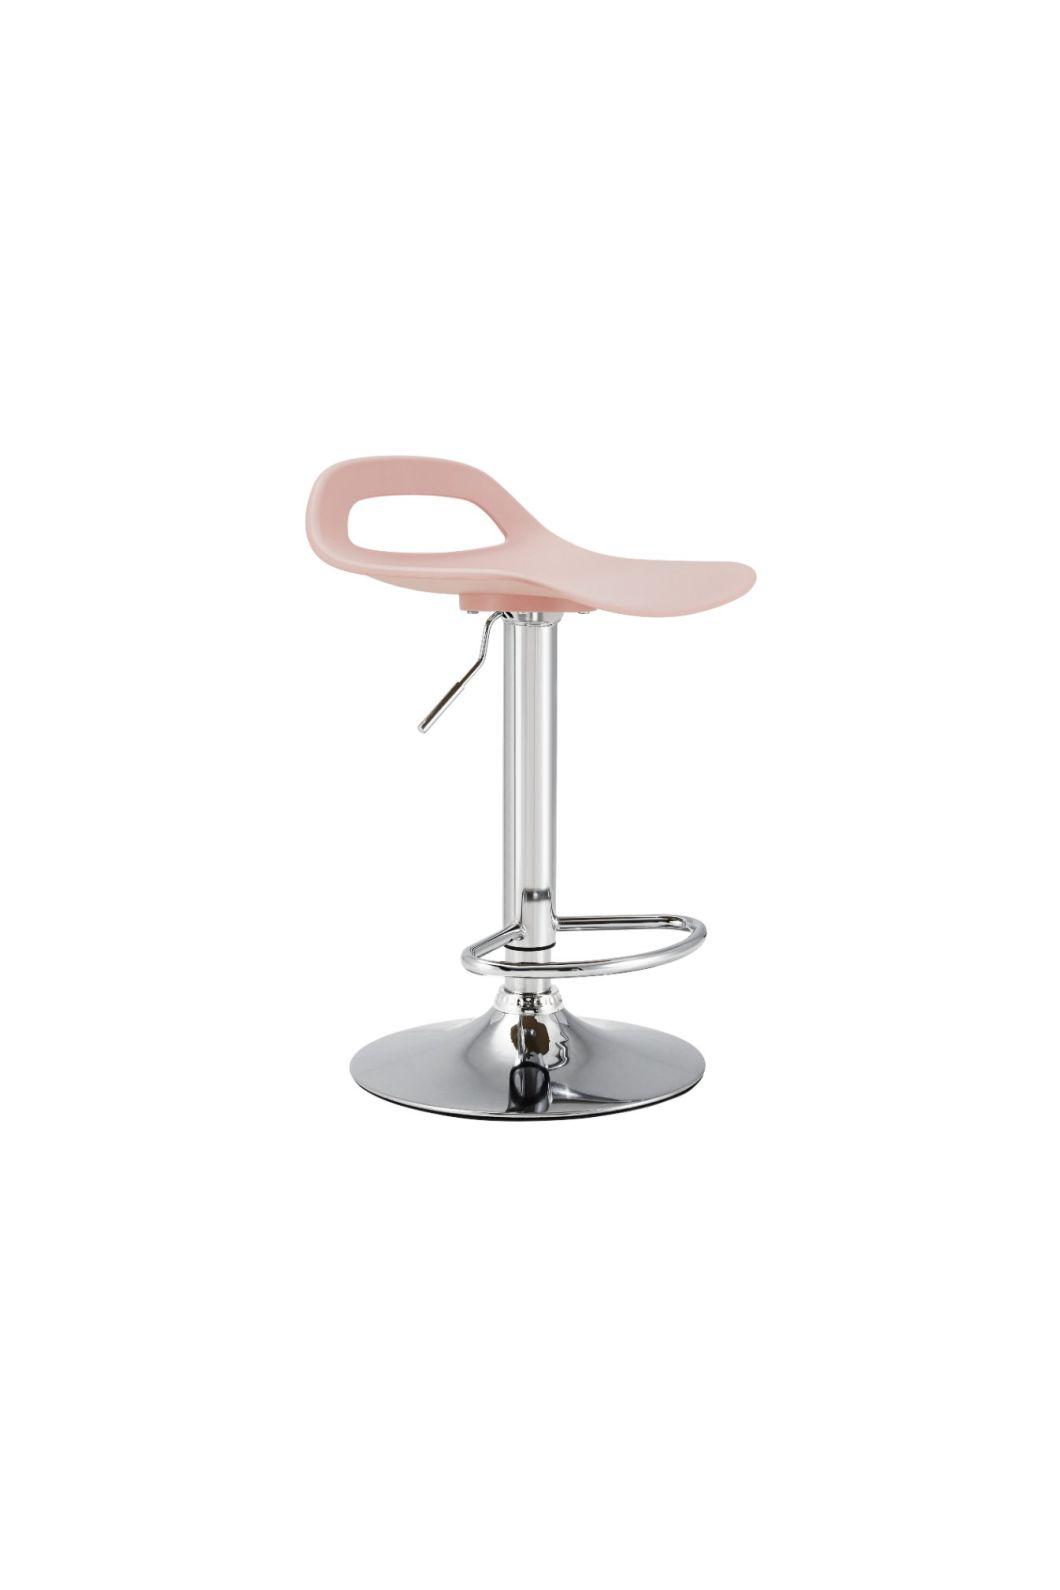 Factory Wholesale ABS Plastic Seat Kitchen Counter Bar Stool High Chair for Bar Table